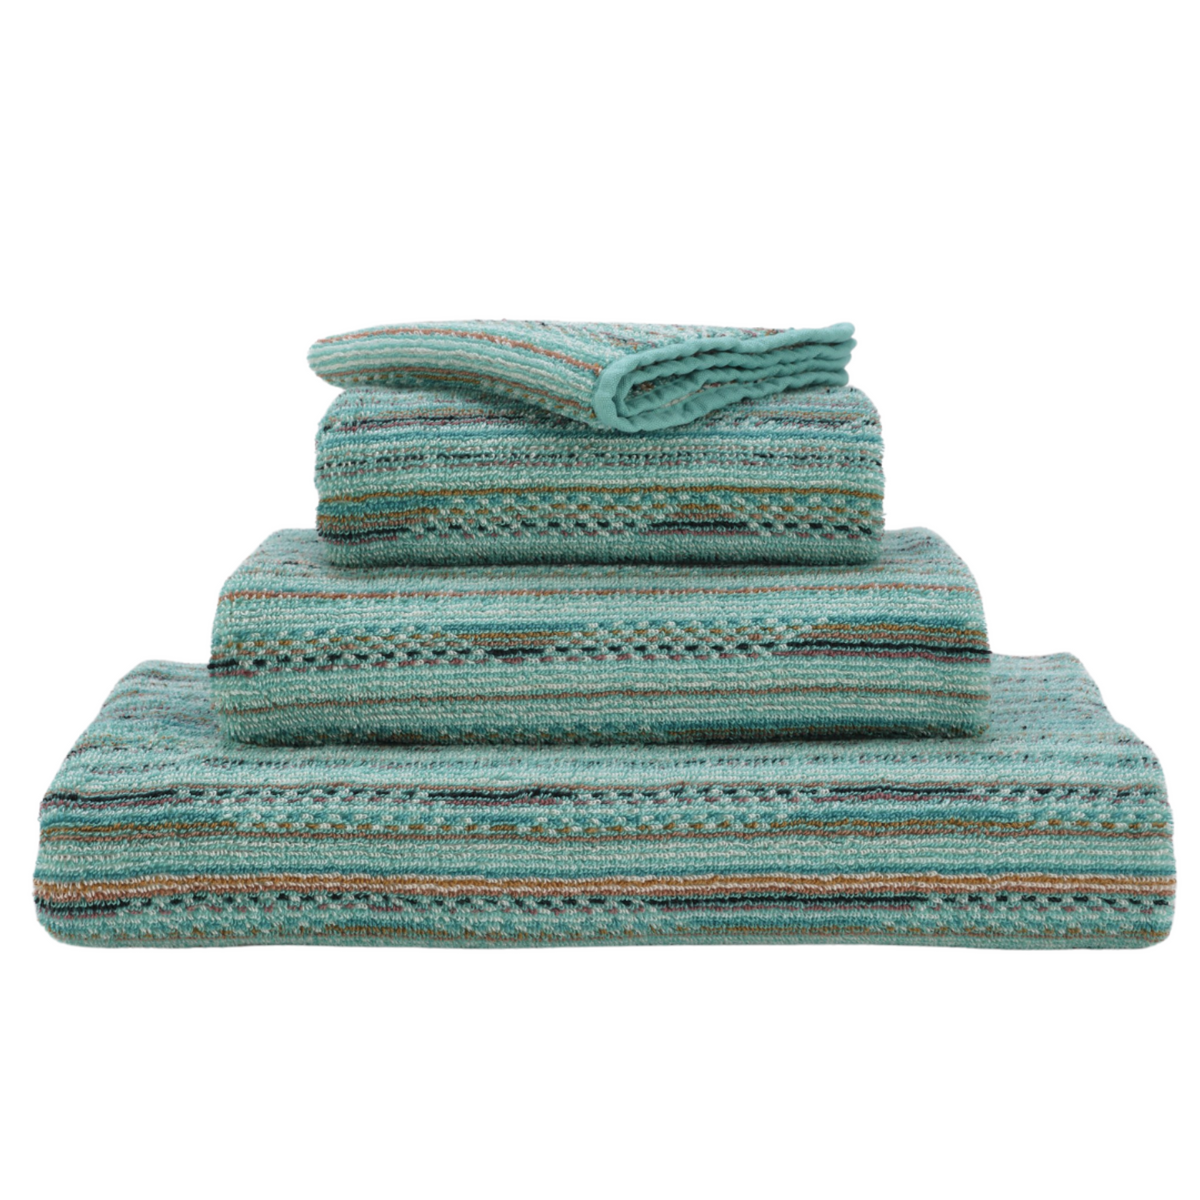 Abyss Lulabi Bath Towels and Robes Stack Fine Linens